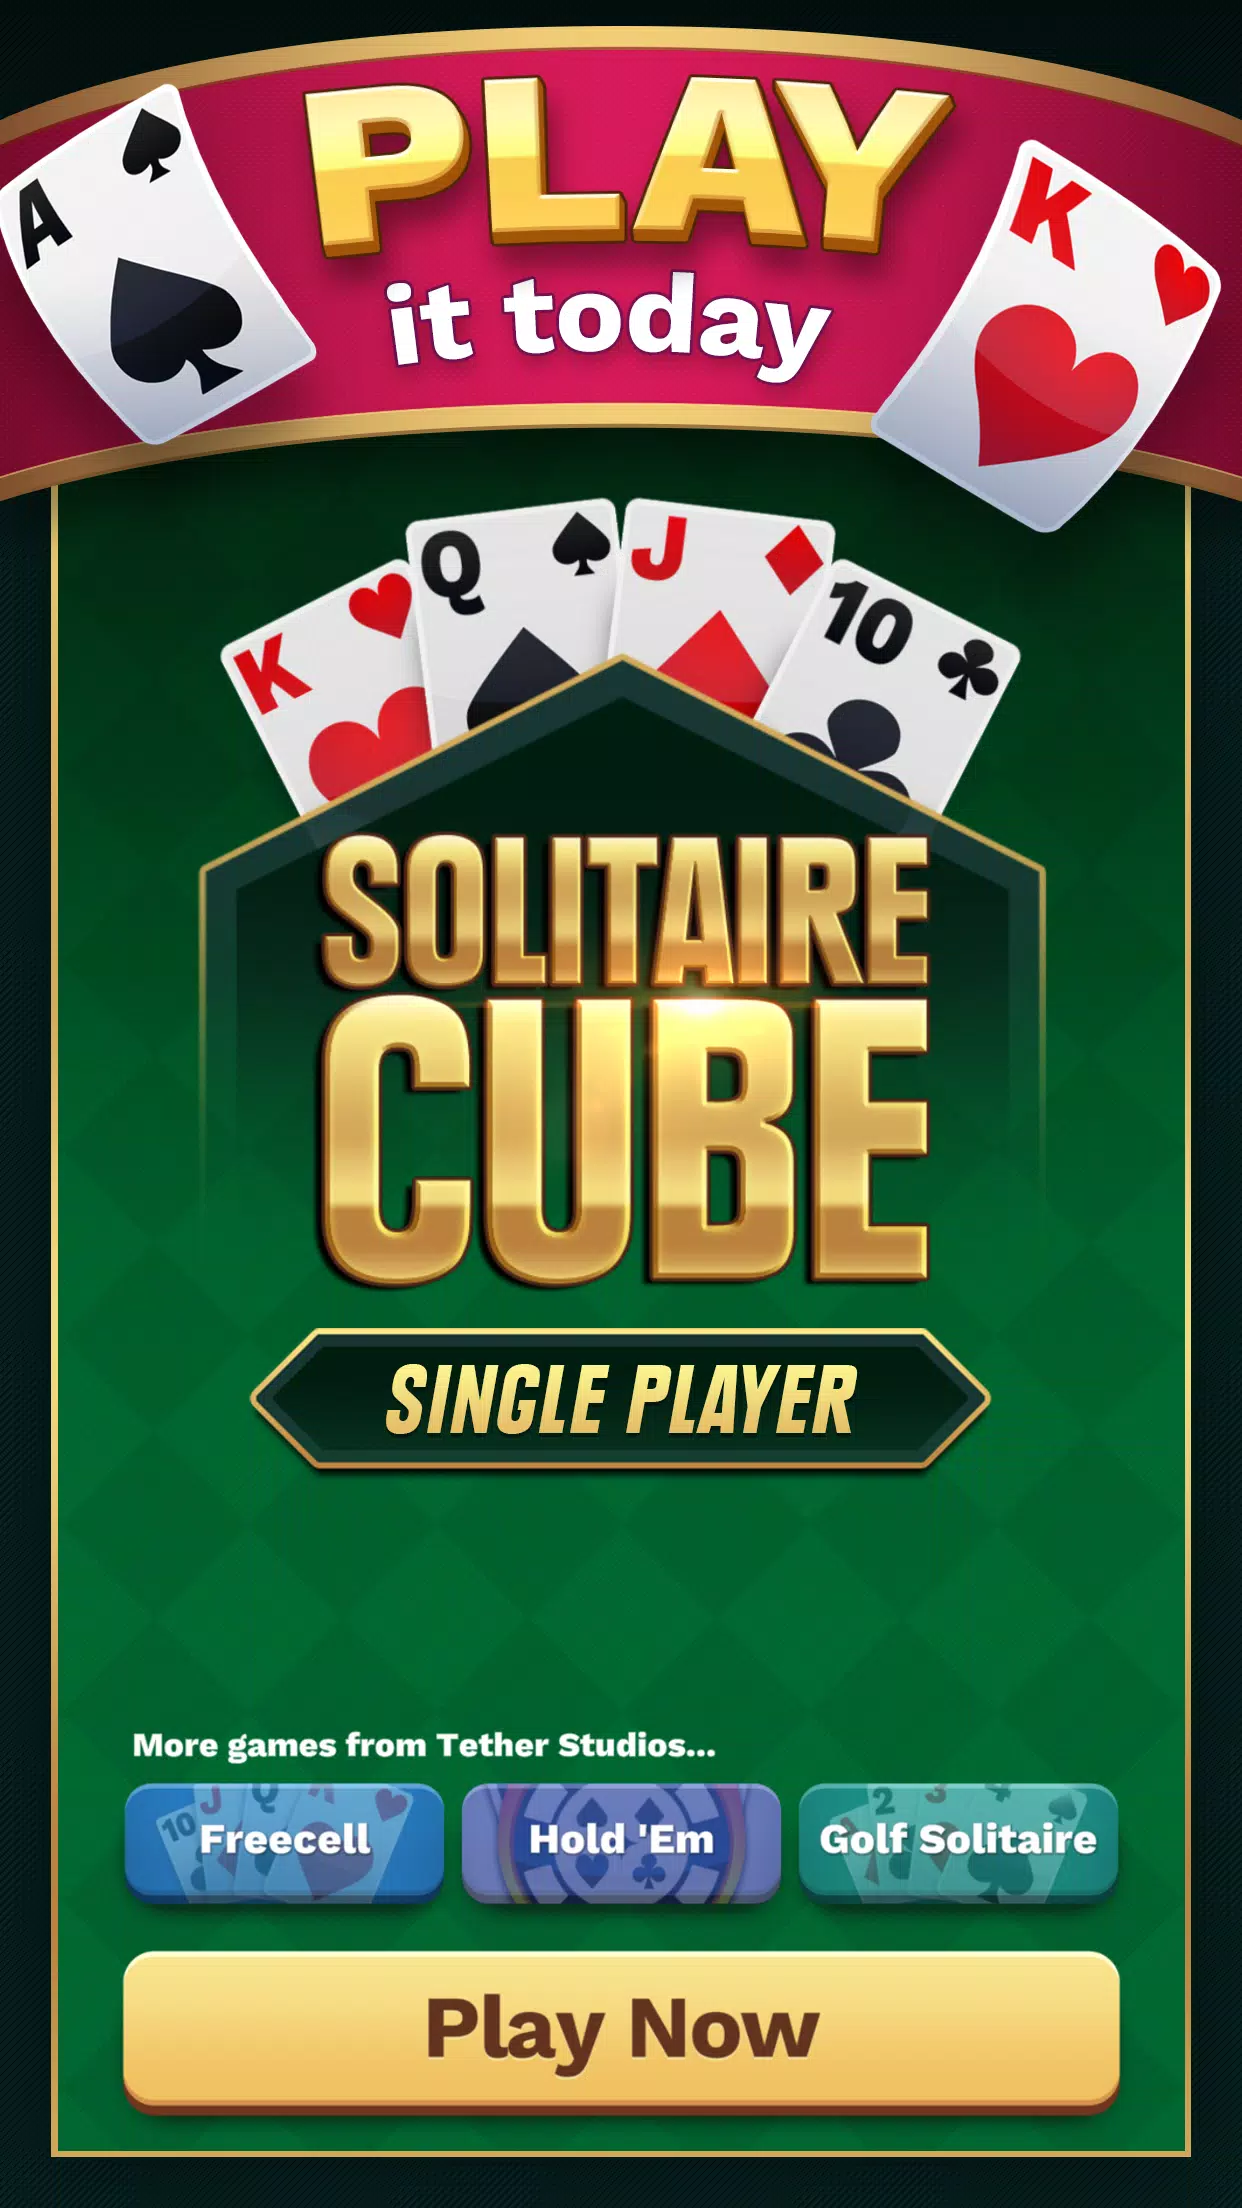 Solitaire Cube: Single Player Screenshot 1